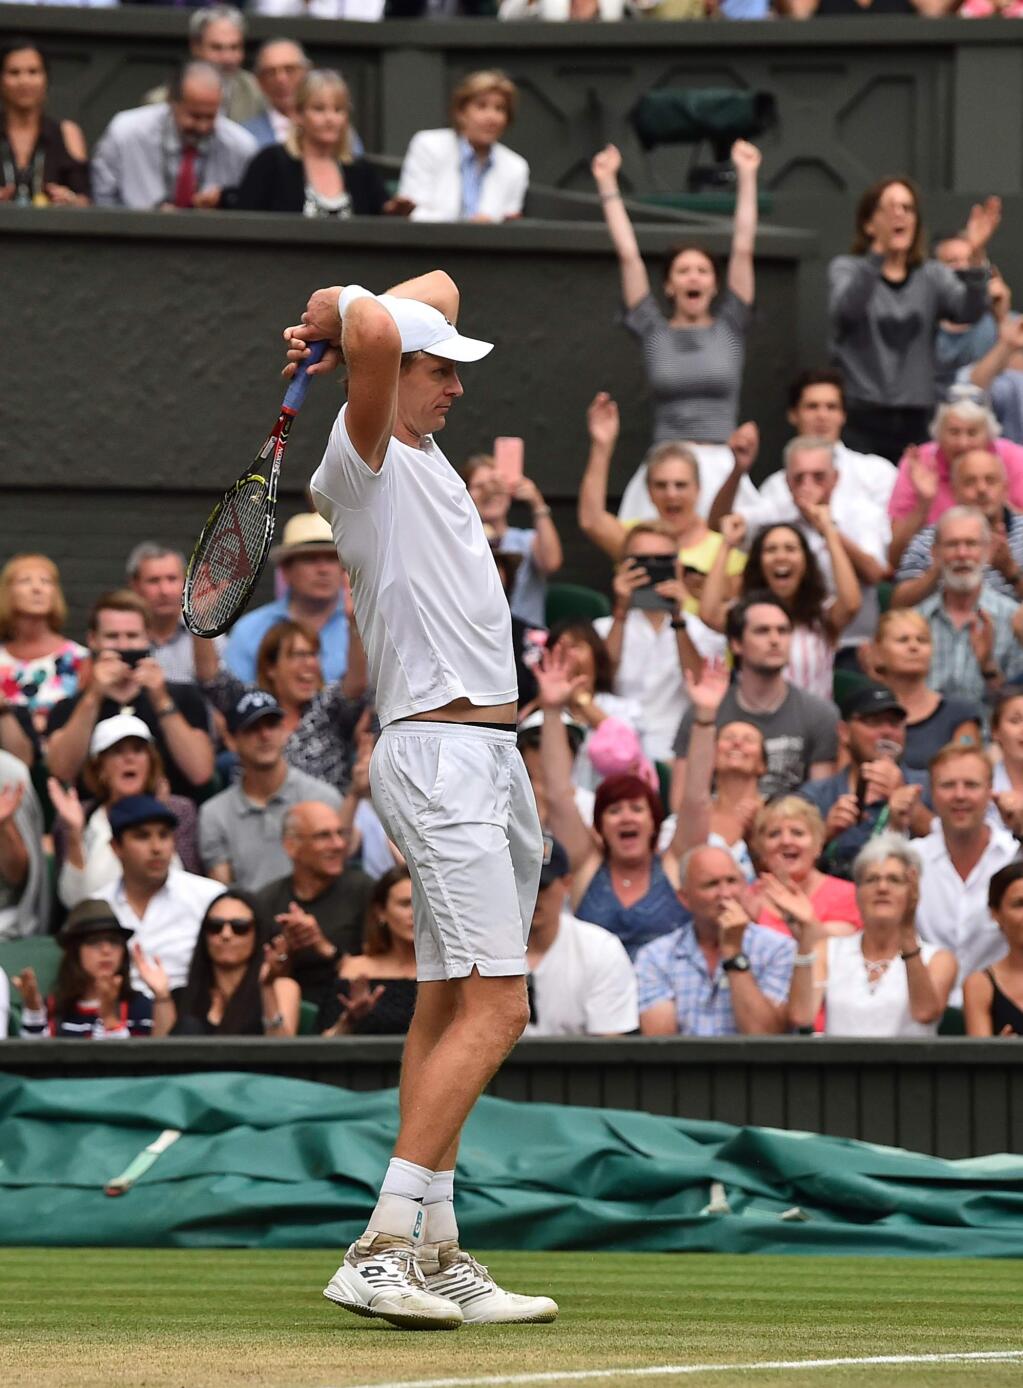 Kevin Anderson of South Africa after defeating John Isner of the US in their men's singles semifinal match at the Wimbledon Tennis Championships, in London, Friday July 13, 2018. (AP Photo/Glyn Kirk, Pool)